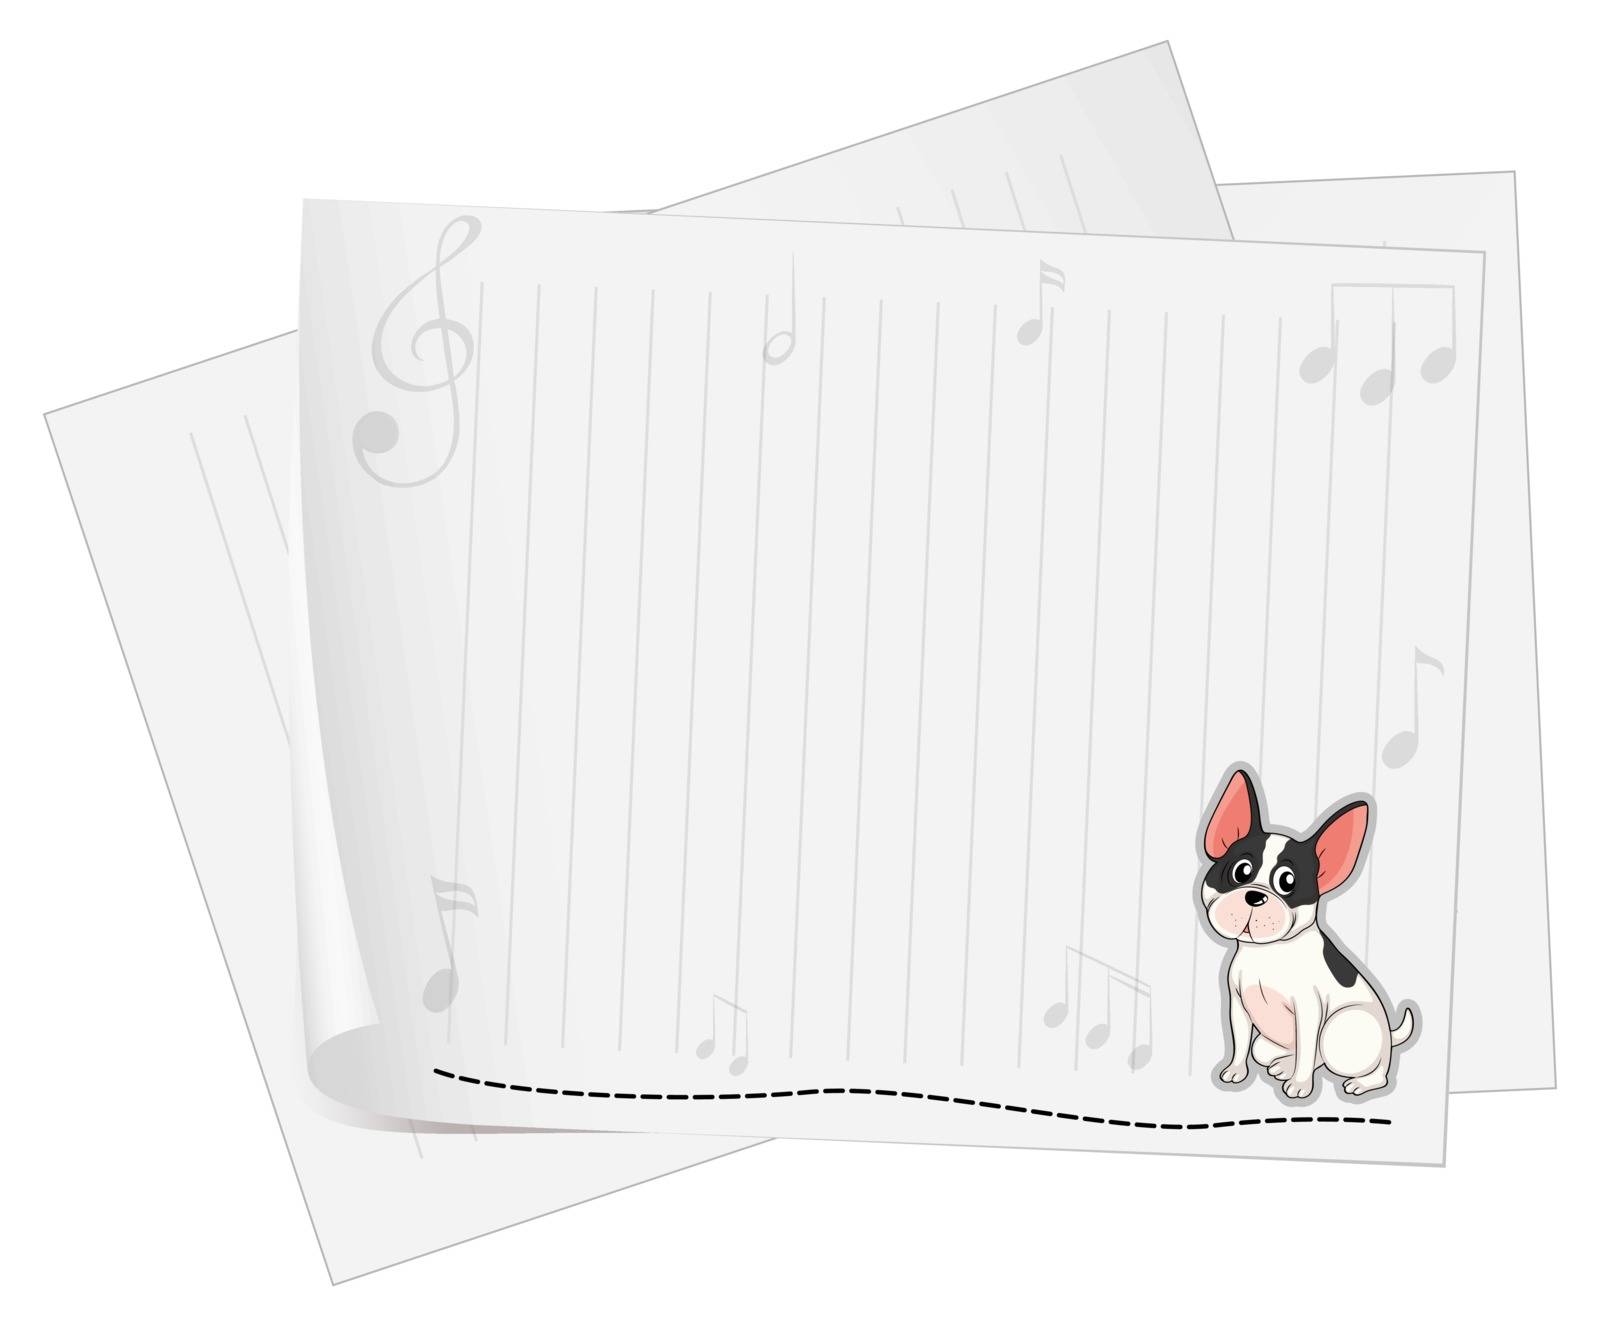 A dog printed on a white paper with musical notes by iimages